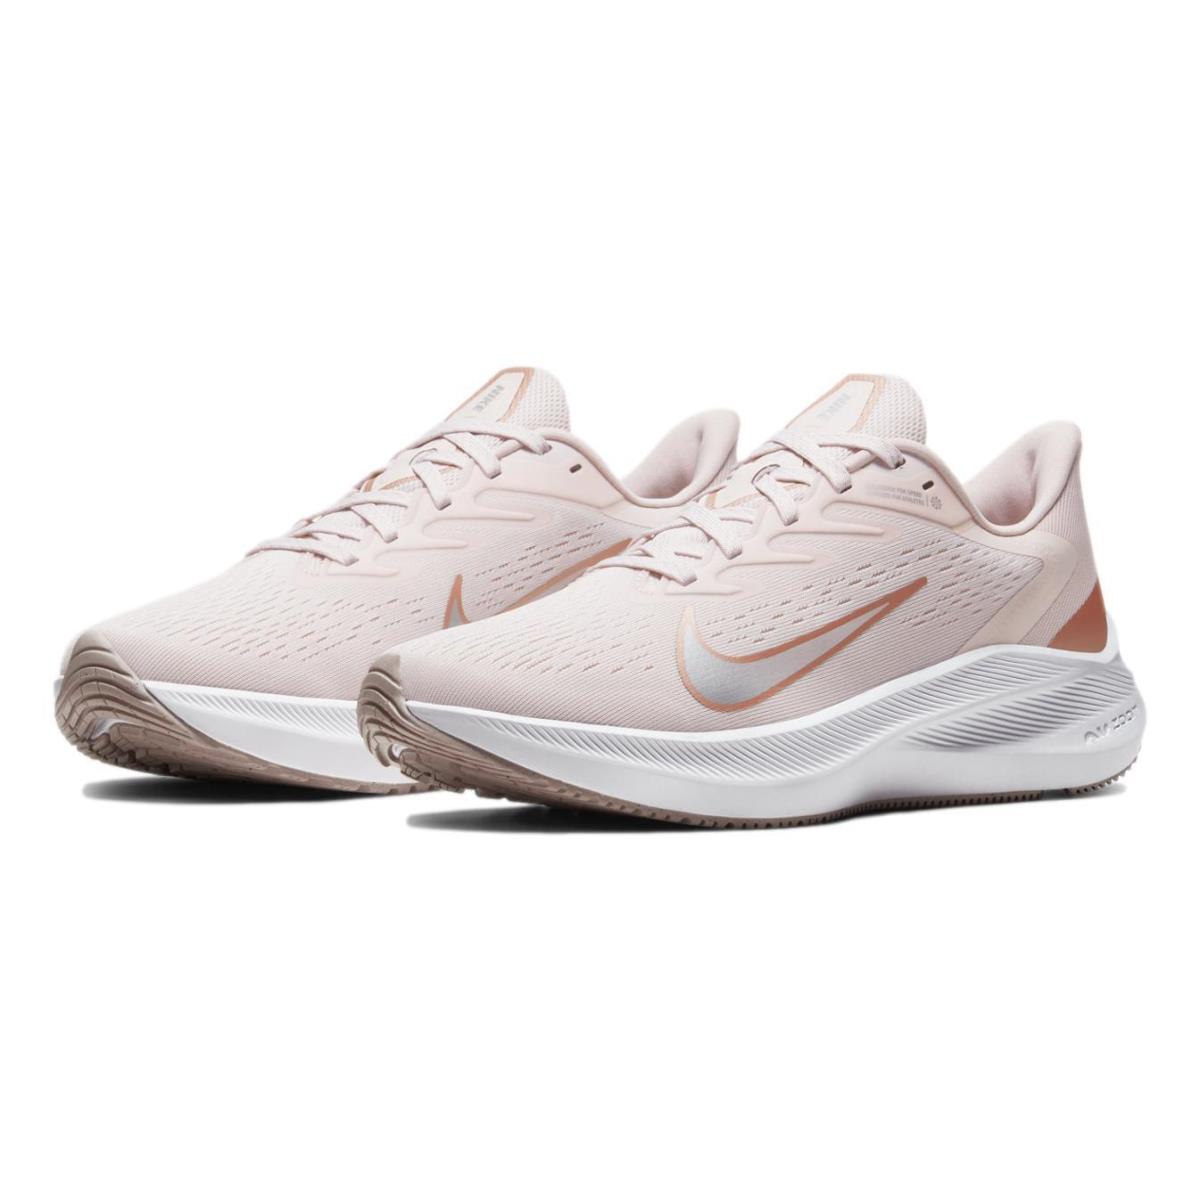 Nike Women`s Zoom Winflo 7 `barely Rose` Running Shoes CJ0302-601 - Pink